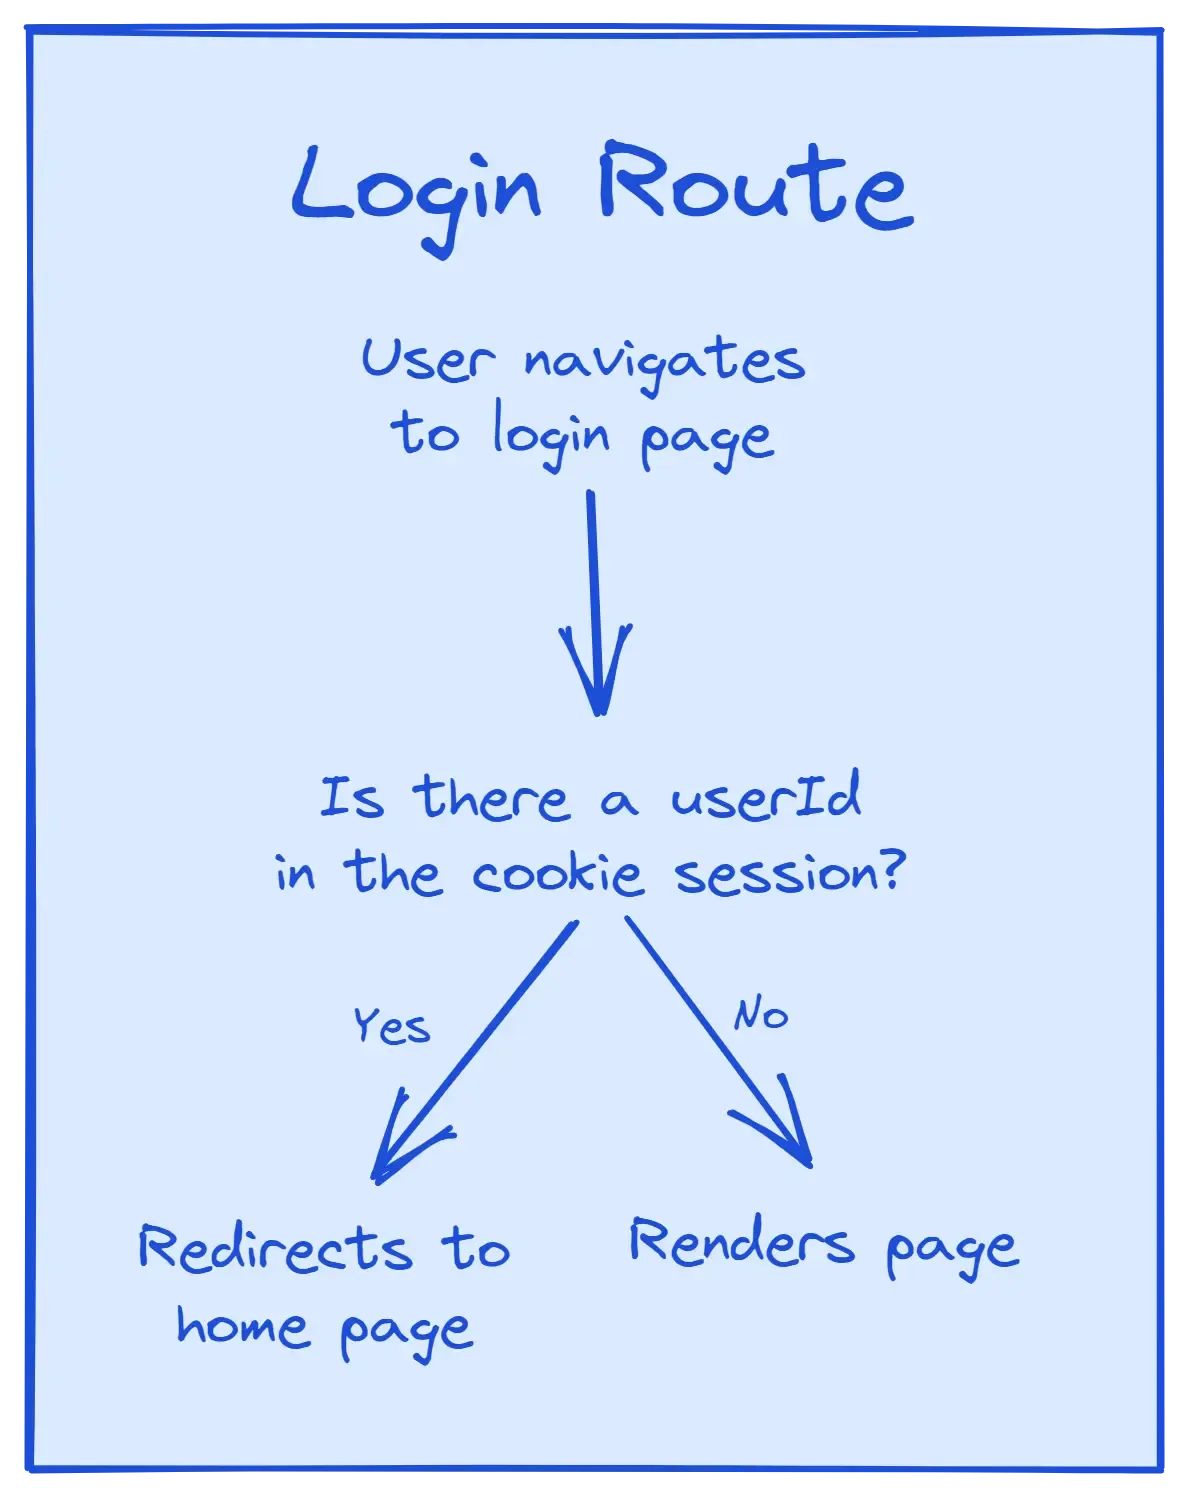 A flow chart showing a check for the userId in the cookie session. If it is not present, we render the page. If it is, we redirect to the home page.